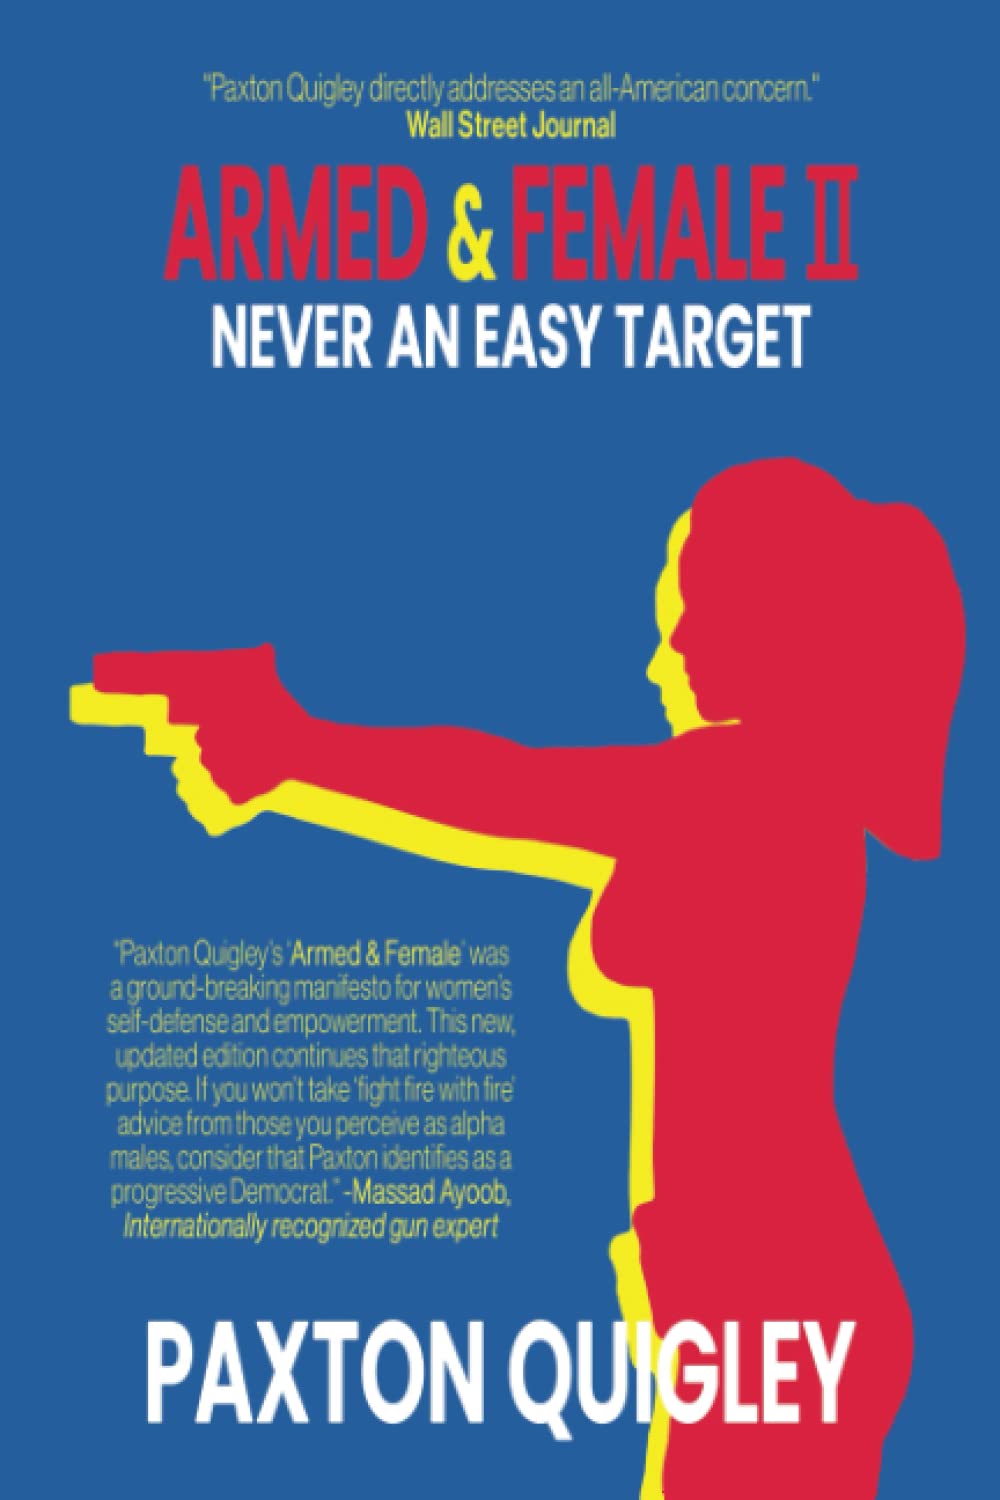 Empowering Women through "Armed & Female II: Never an Easy Target" by Paxton Quigley